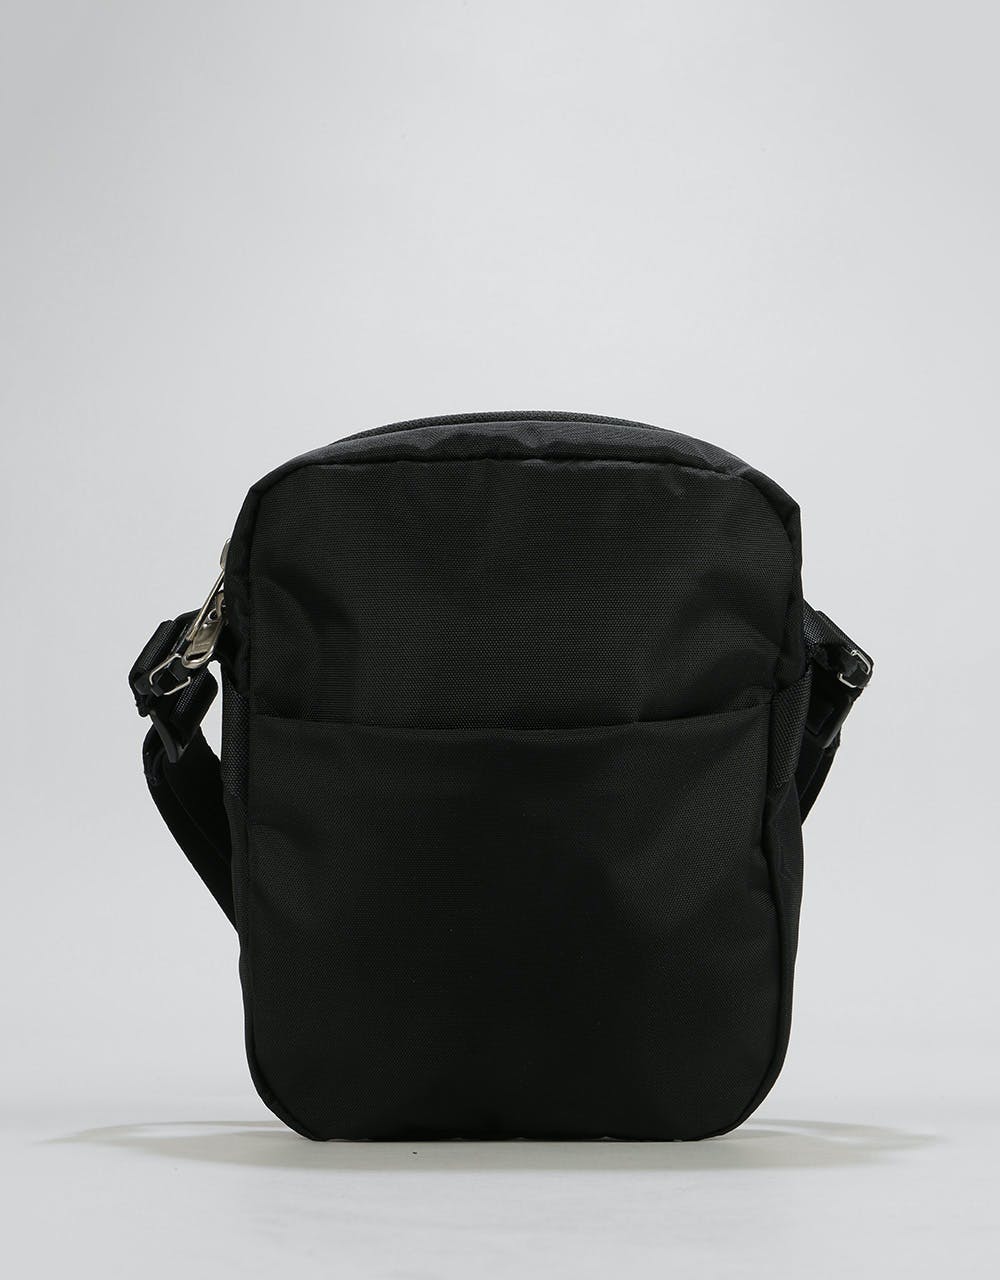 The North Face Convertible Shoulder Bag - TNF Black/High Rise Grey